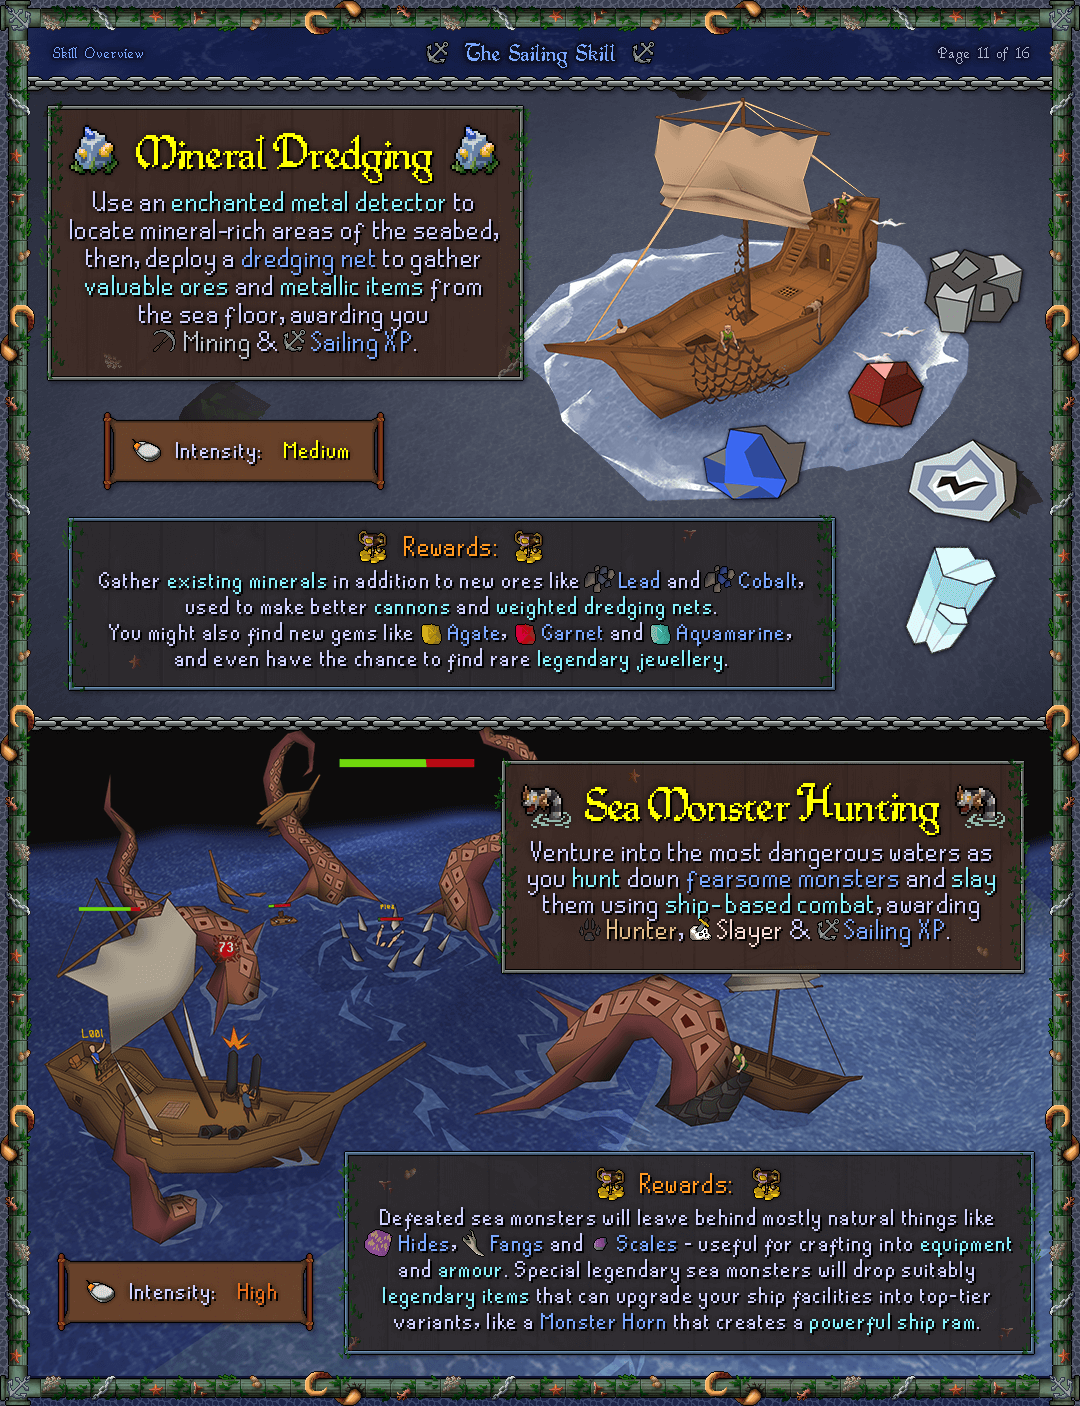 Old School Runescape Sailing goes to the polls as its first new skill